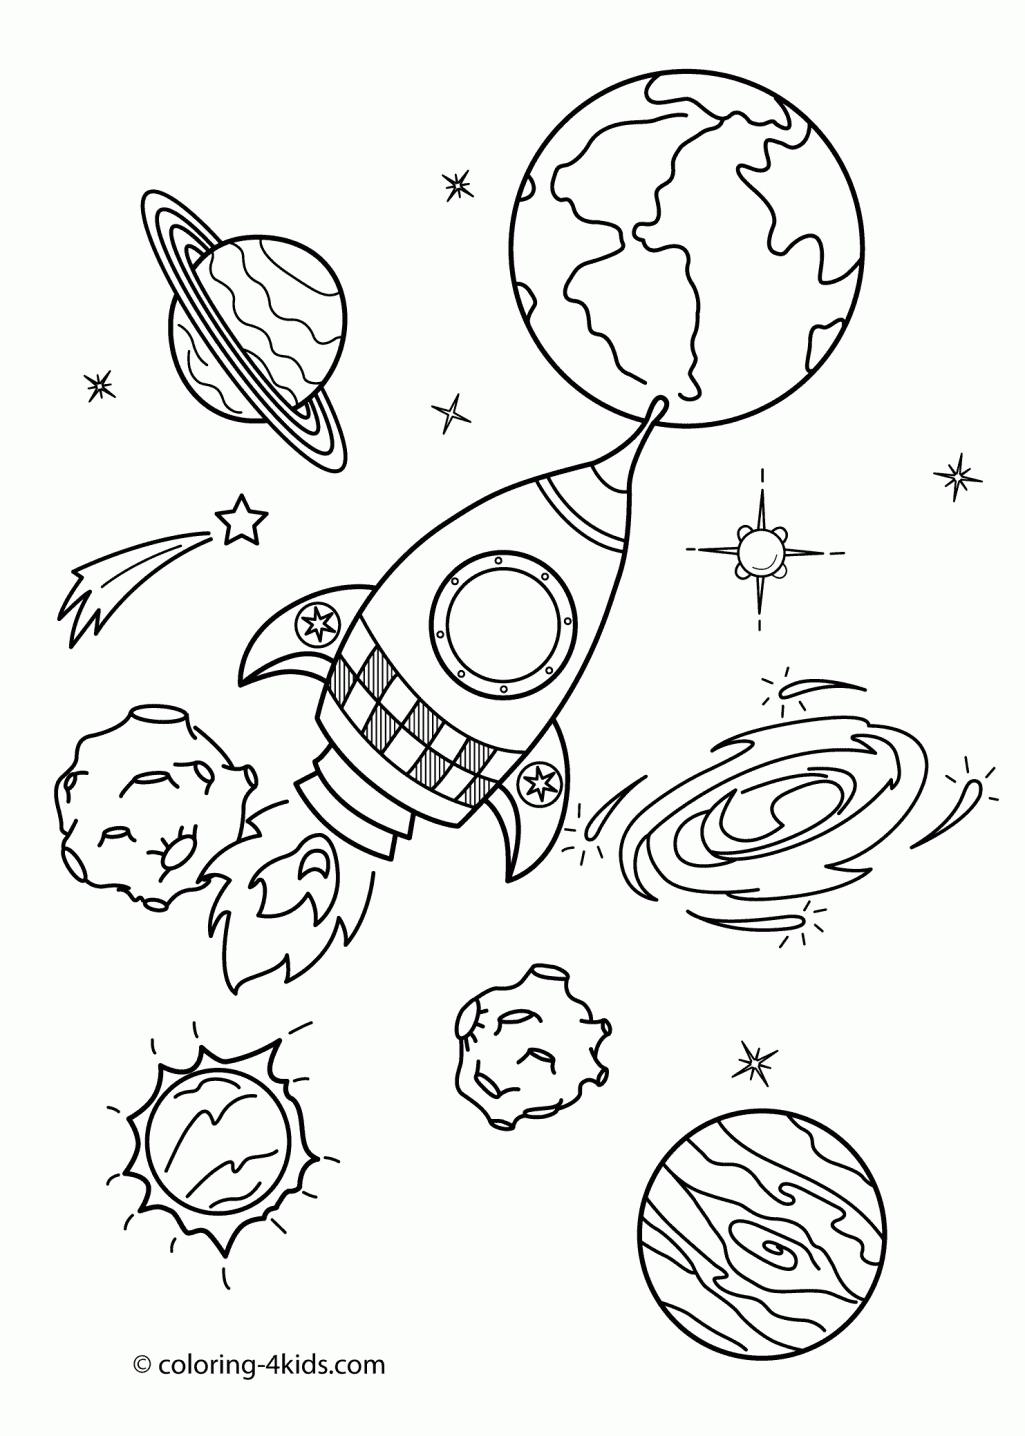 Sagacious Outer Space Colouring Pages Sinceso That Space Coloring Coloring Home